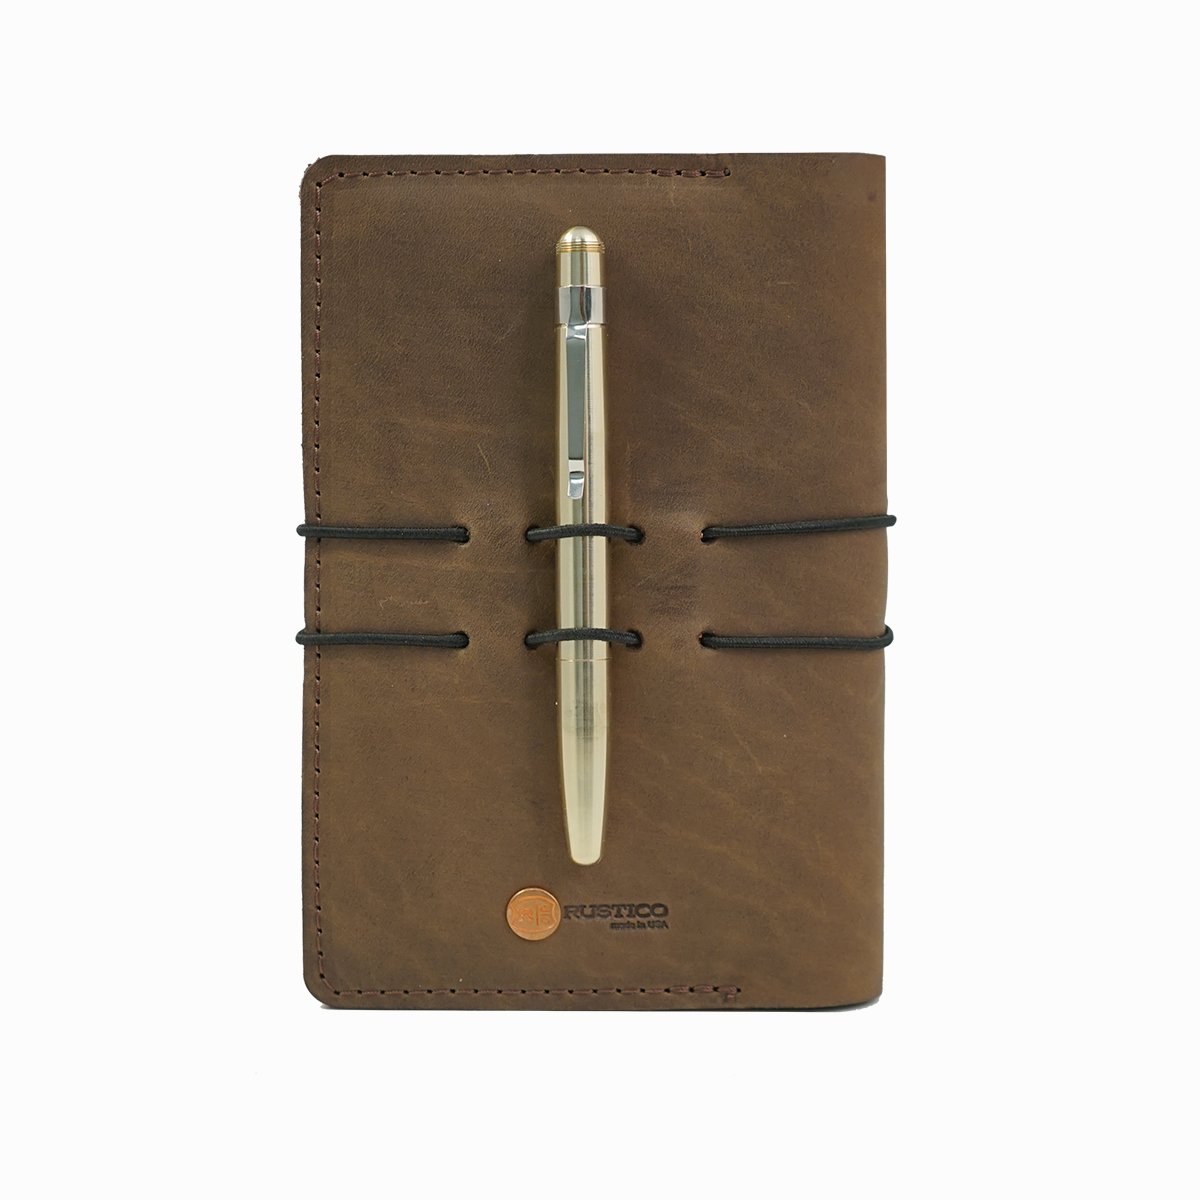 Leuchtturm1917 A6 Leather Notebook Cover – 3.5” x 5.75”